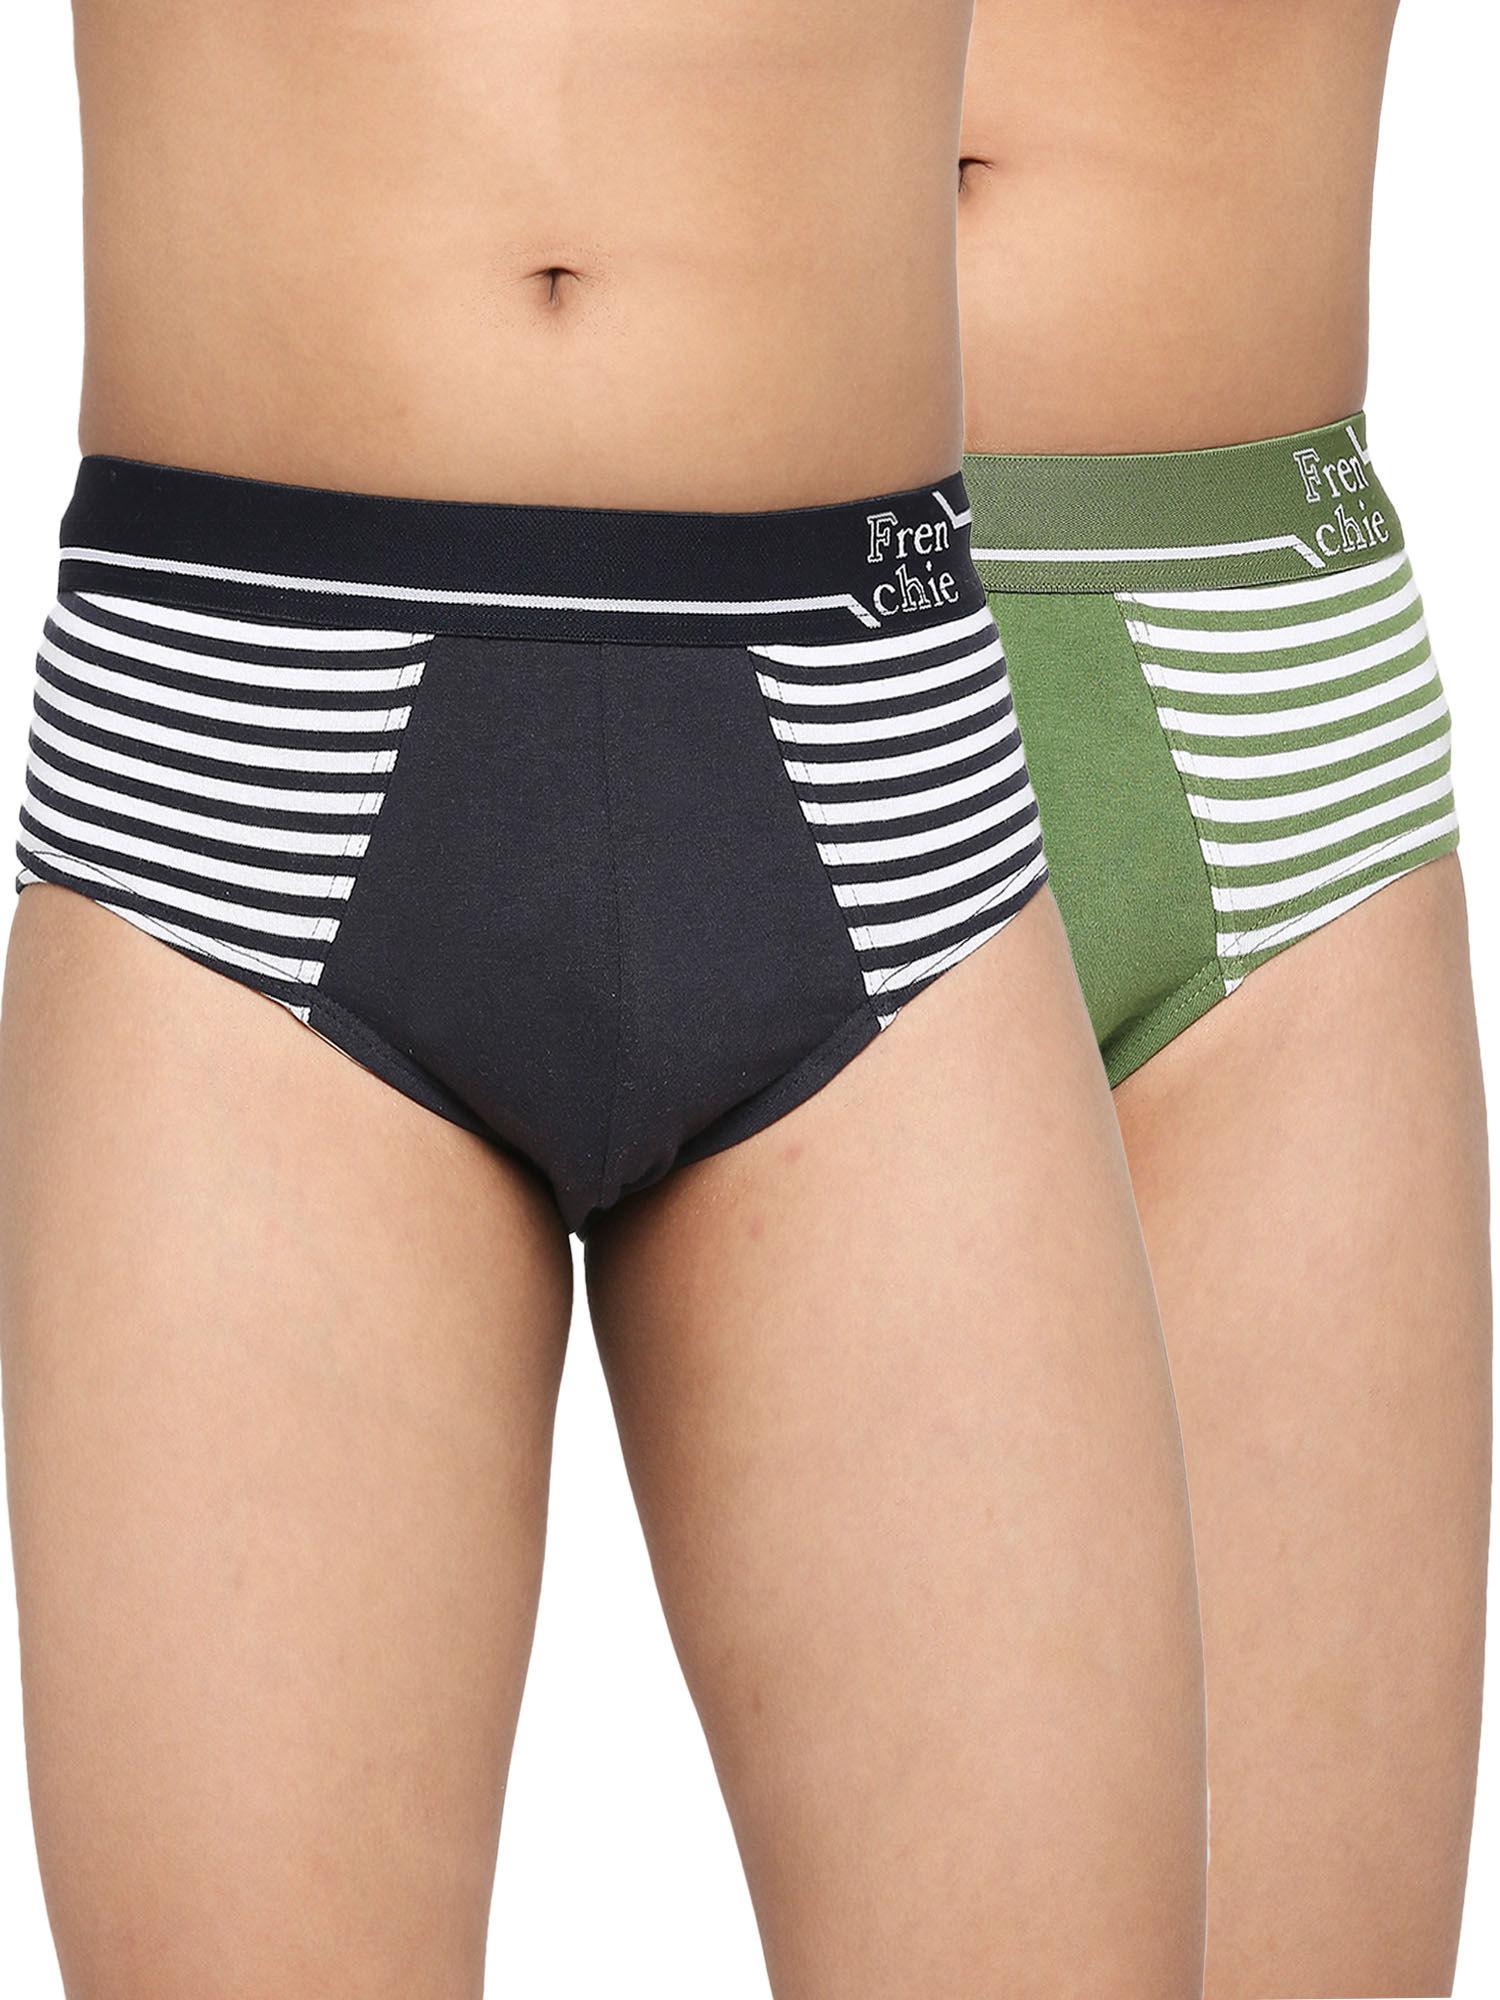 teenagers-cotton-brief-navy-blue-and-green-(pack-of-2)